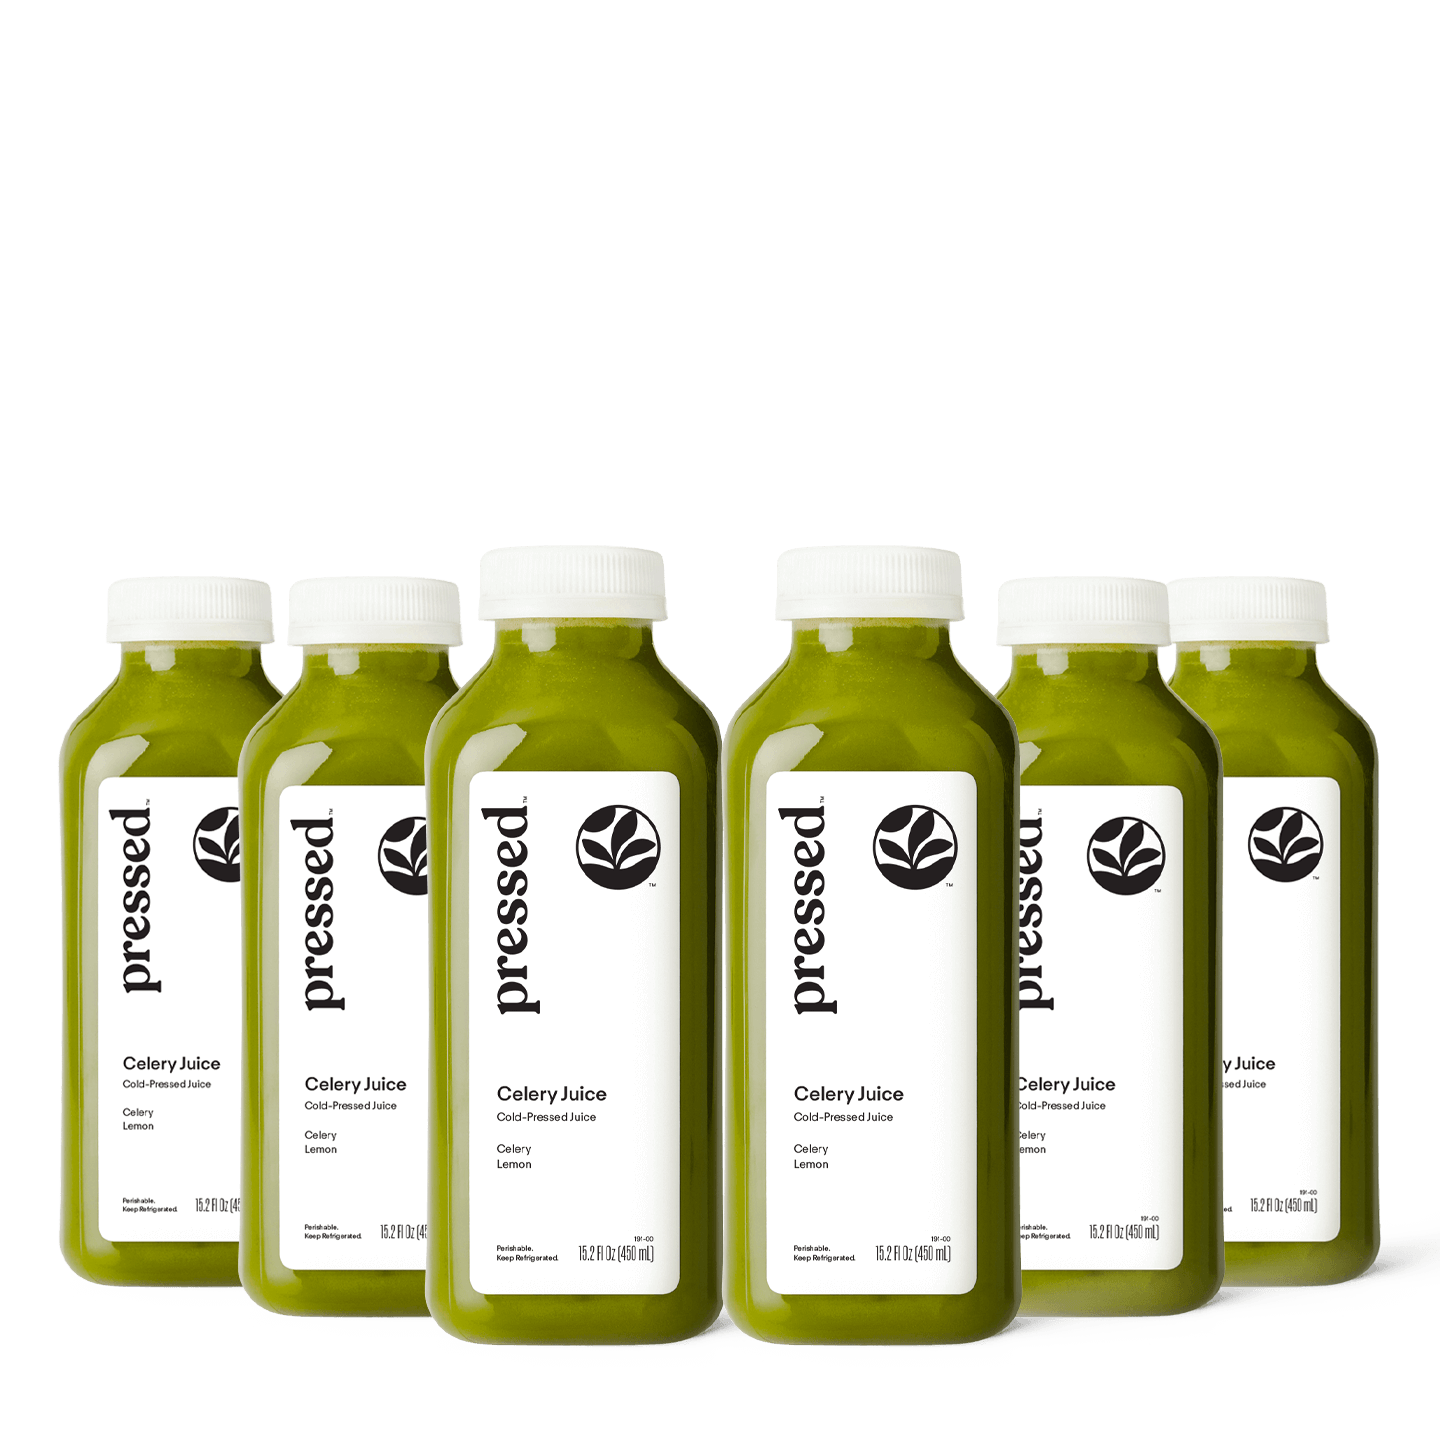 Cold-Pressed Juice, Product